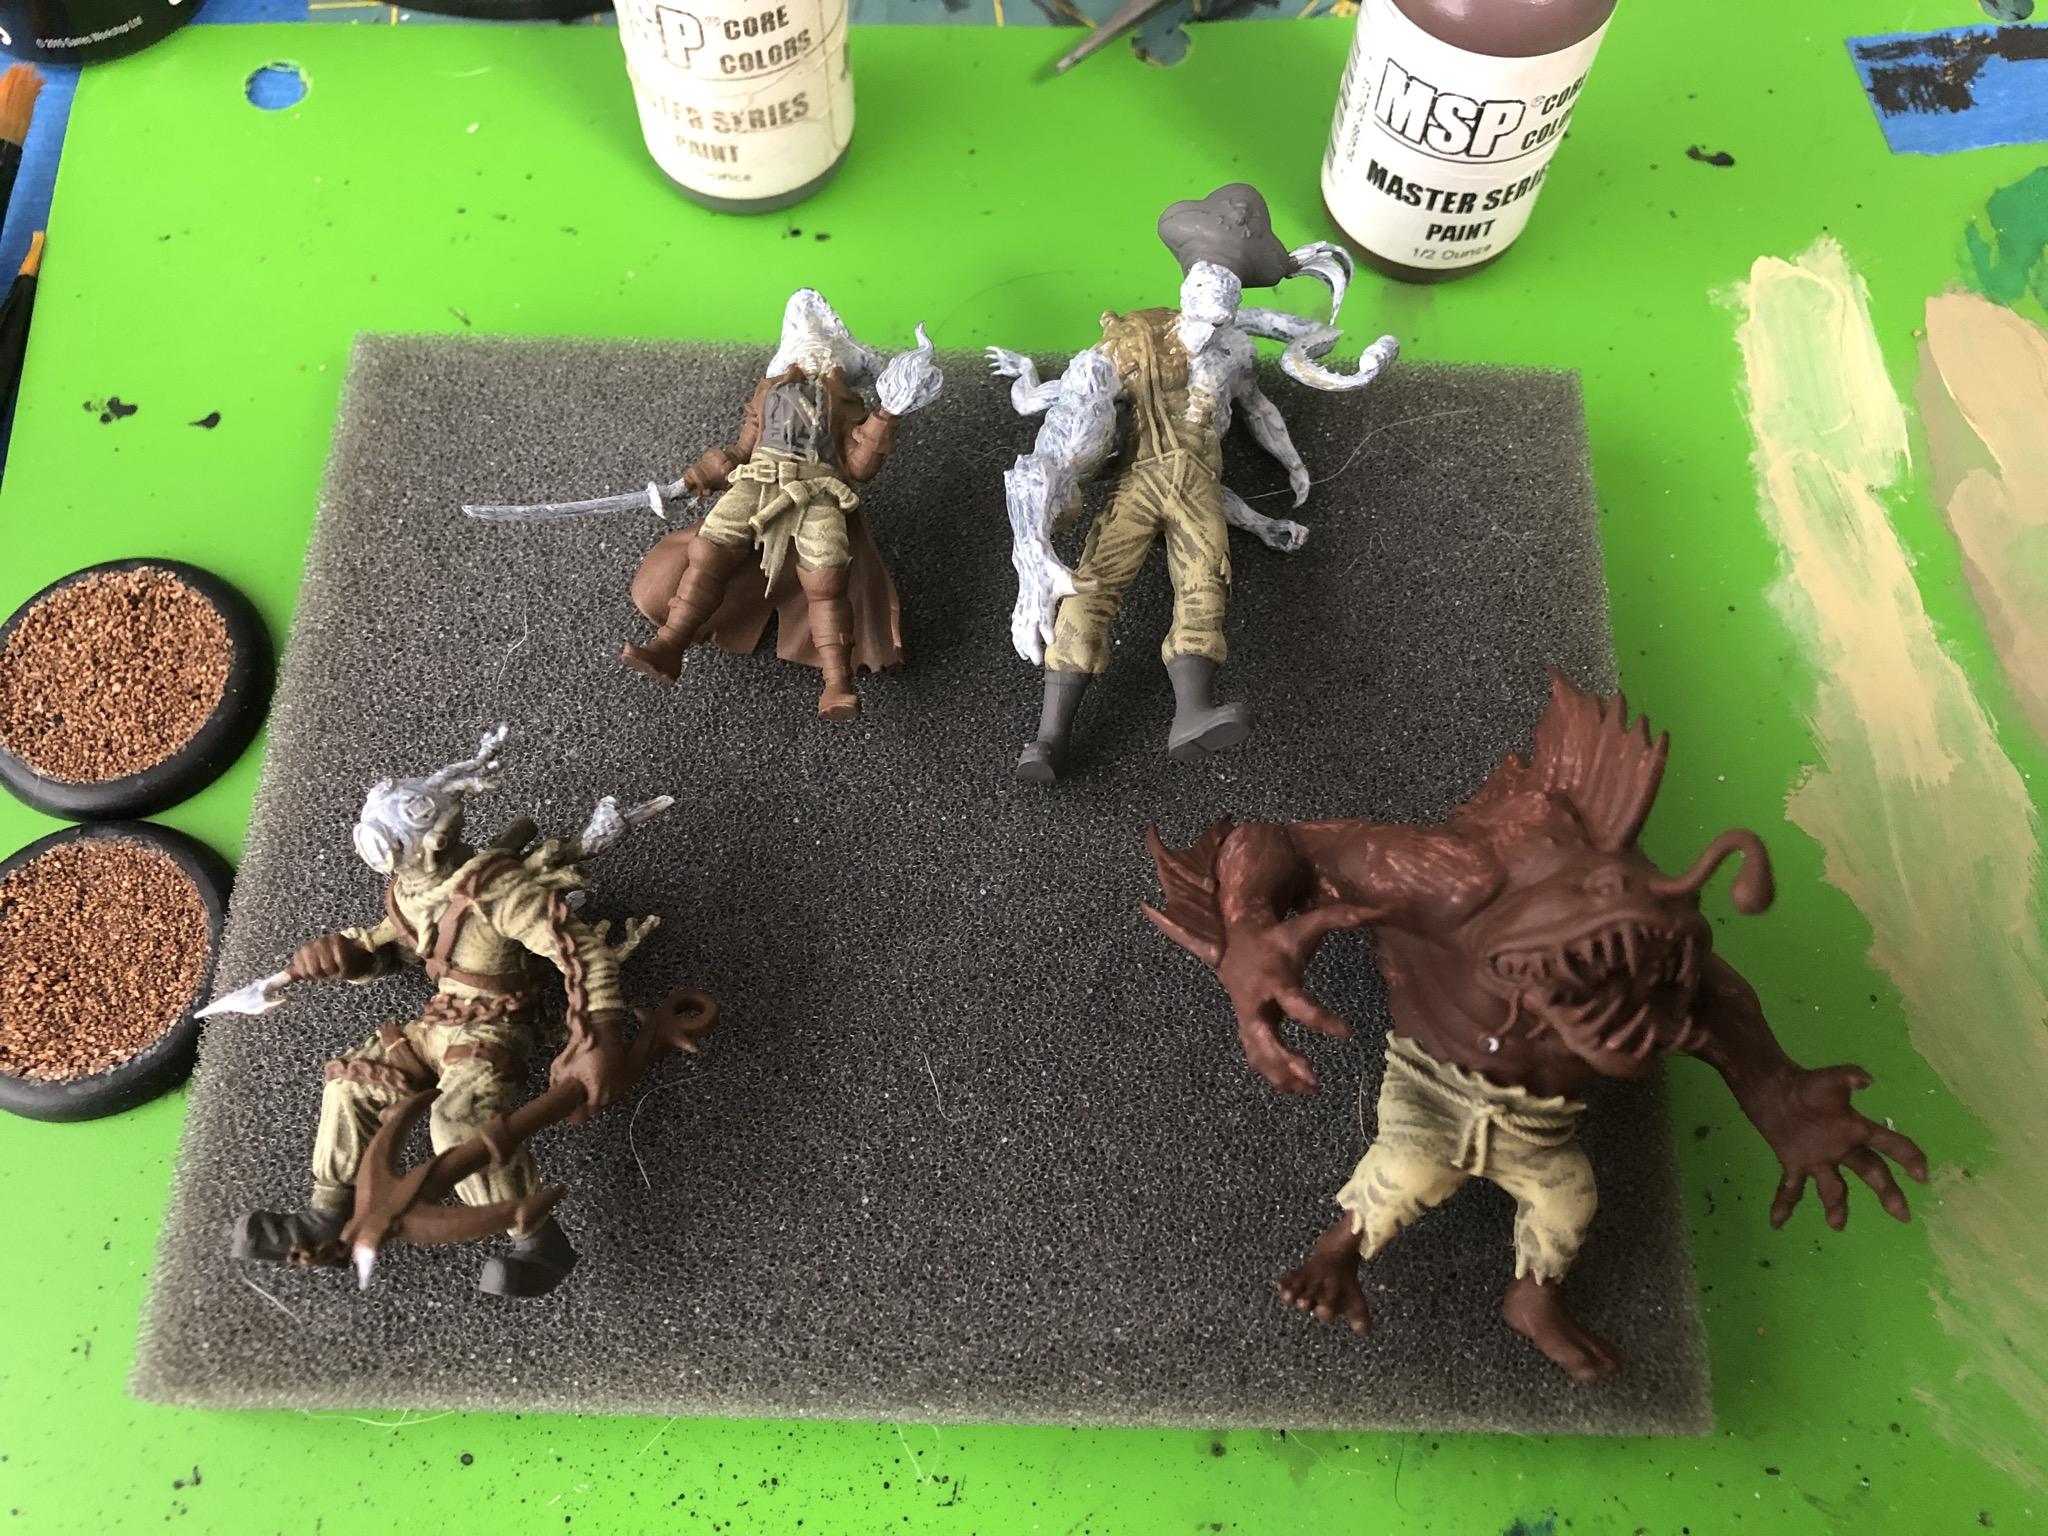 Coral, Diver, Fish, Malifaux, Nautical, Naval, Pirate, Resurectionists, Undead, Work In Progress, Wyrd